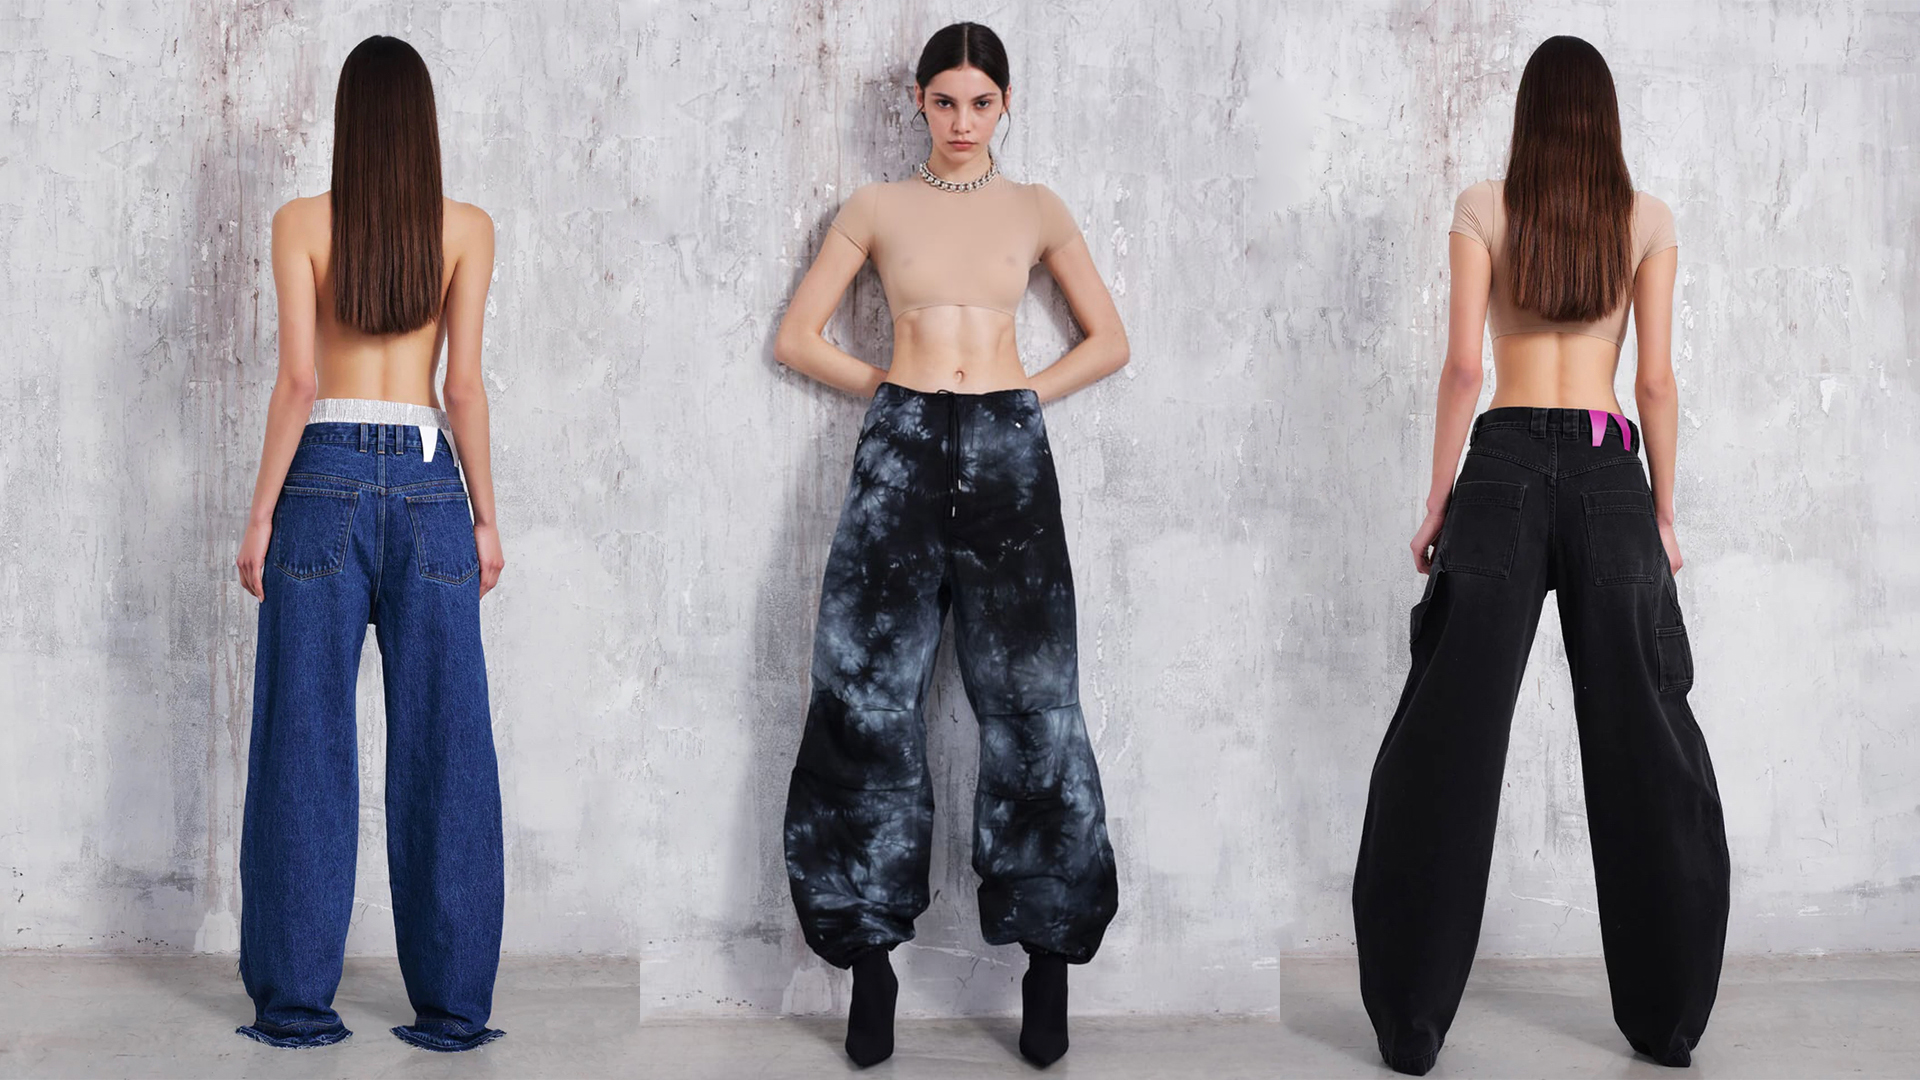 DARKPARK: the Italian label making waves with its oversized denim ...